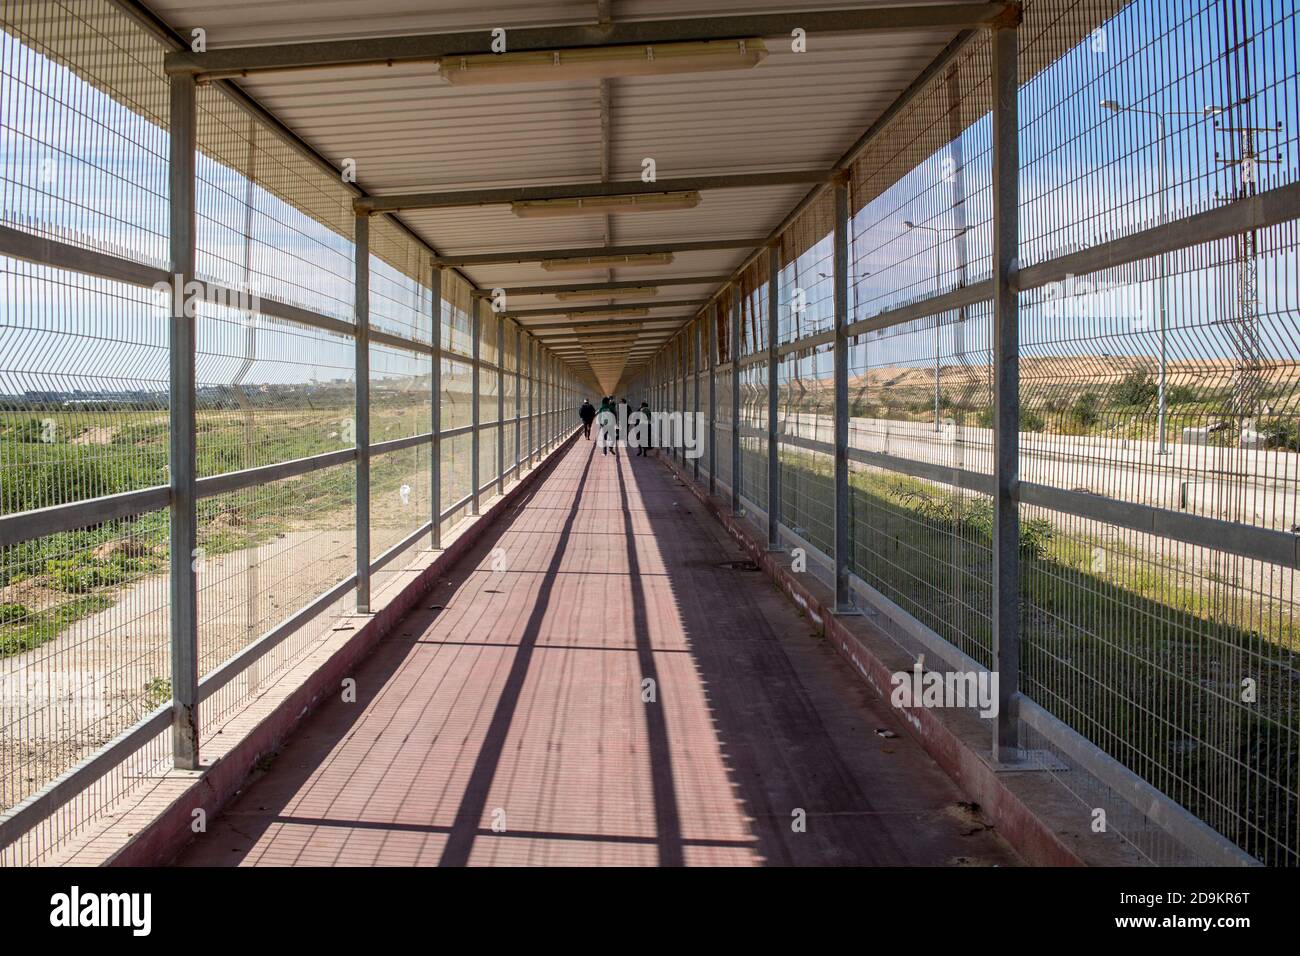 The wall between Israel and Palestine and the security installations Stock Photo